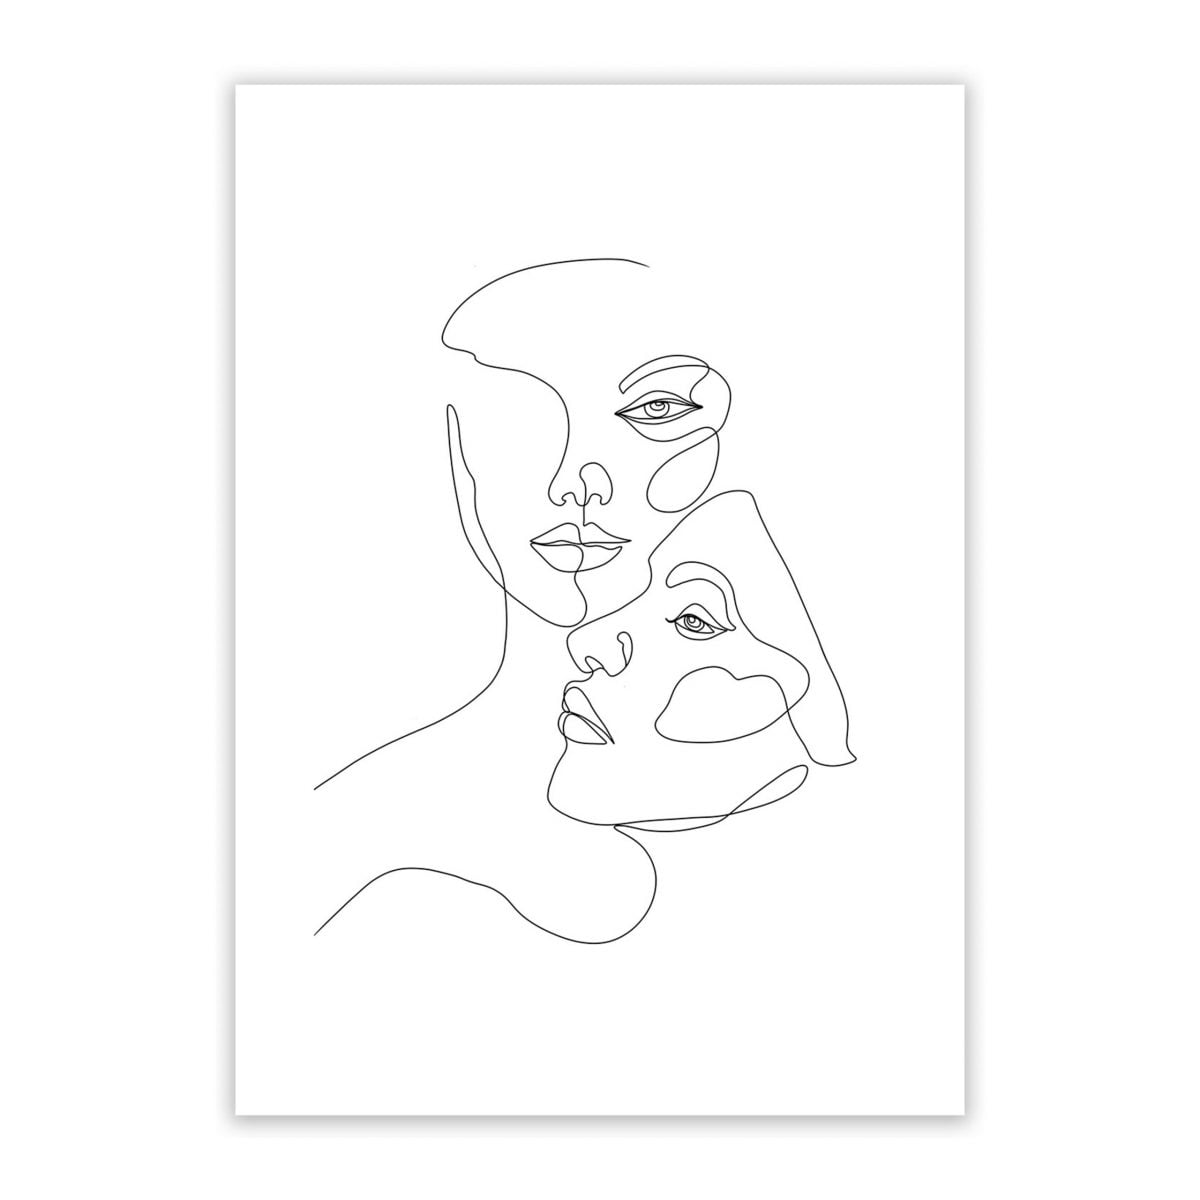 her nude nude erotic wall art prints posters